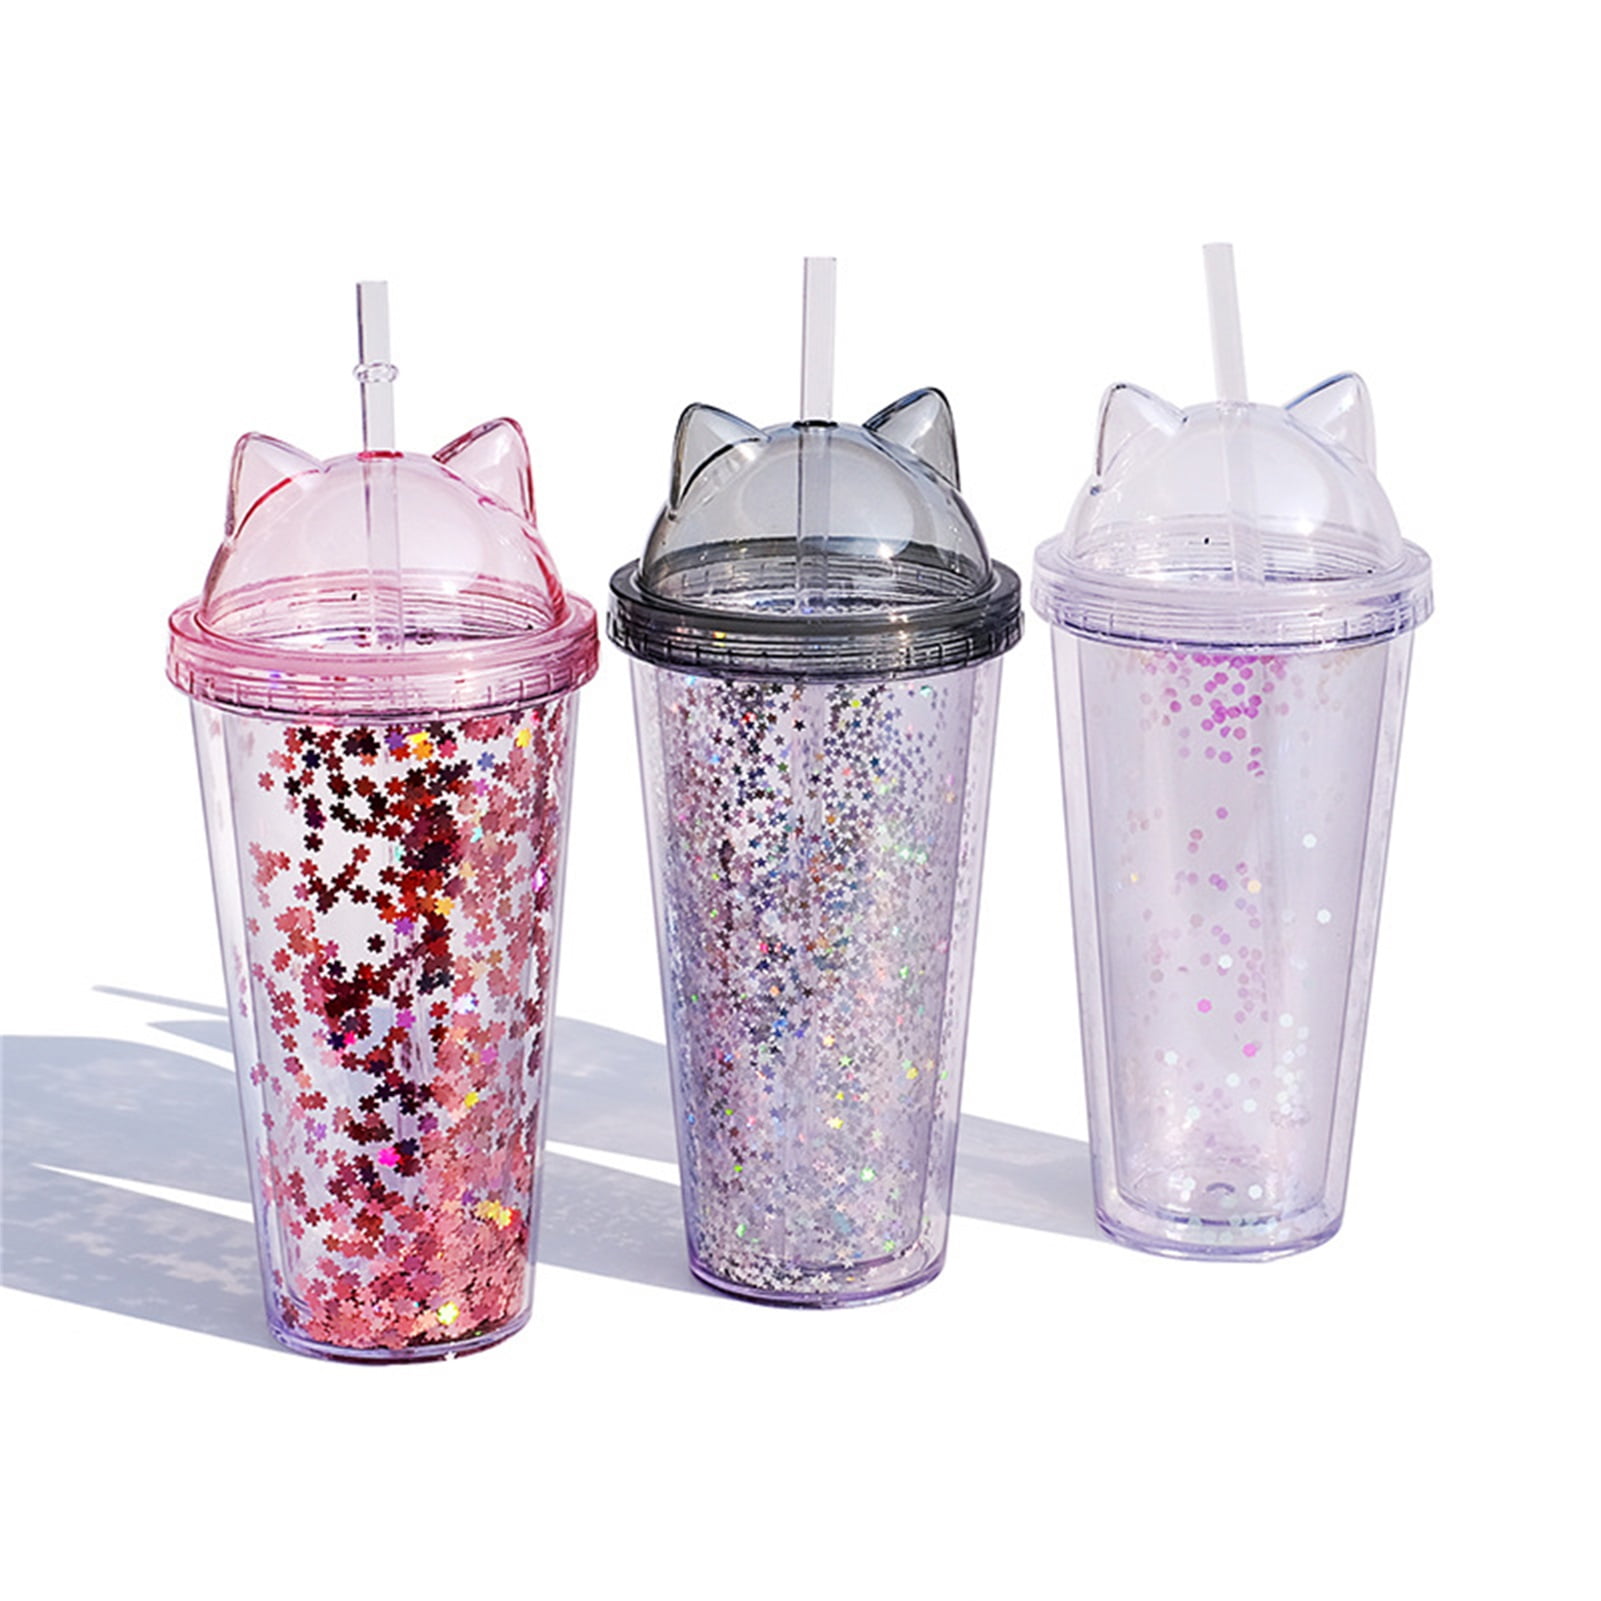 Cheers US 420ml Sequin Travel Coffee Mug Tumblers with Lids Straws Kids Tumblers Reusable Plastic Cold Cups with Lid Insulated Tumbler Cup Funny Mug